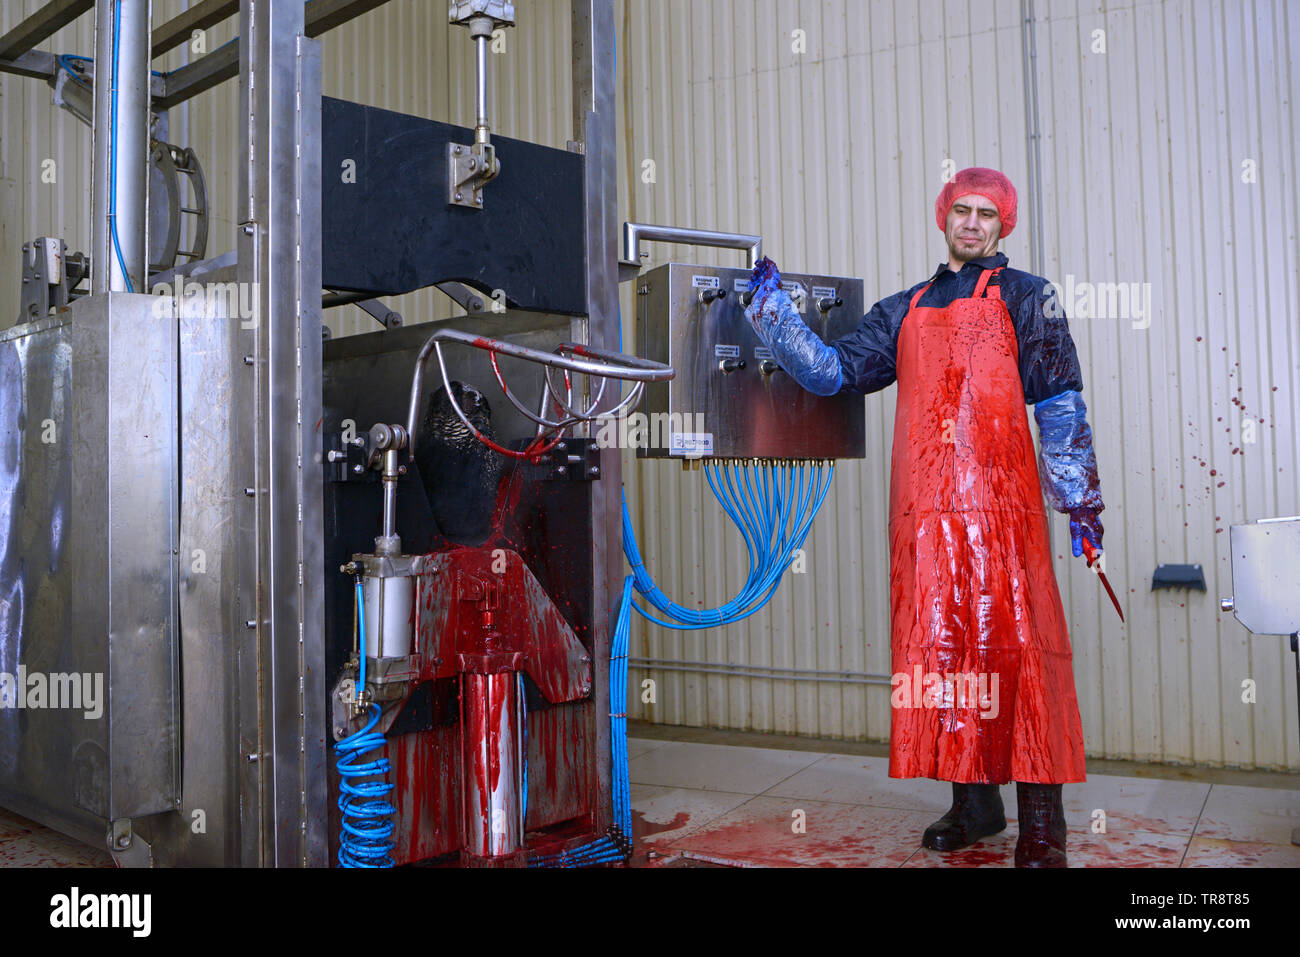 At the slaughterhouse. Worker standing in front of pneumatic stunning killing box, a caw inside after slaughter. April 22, 2019. Kiev, Ukraine Stock Photo